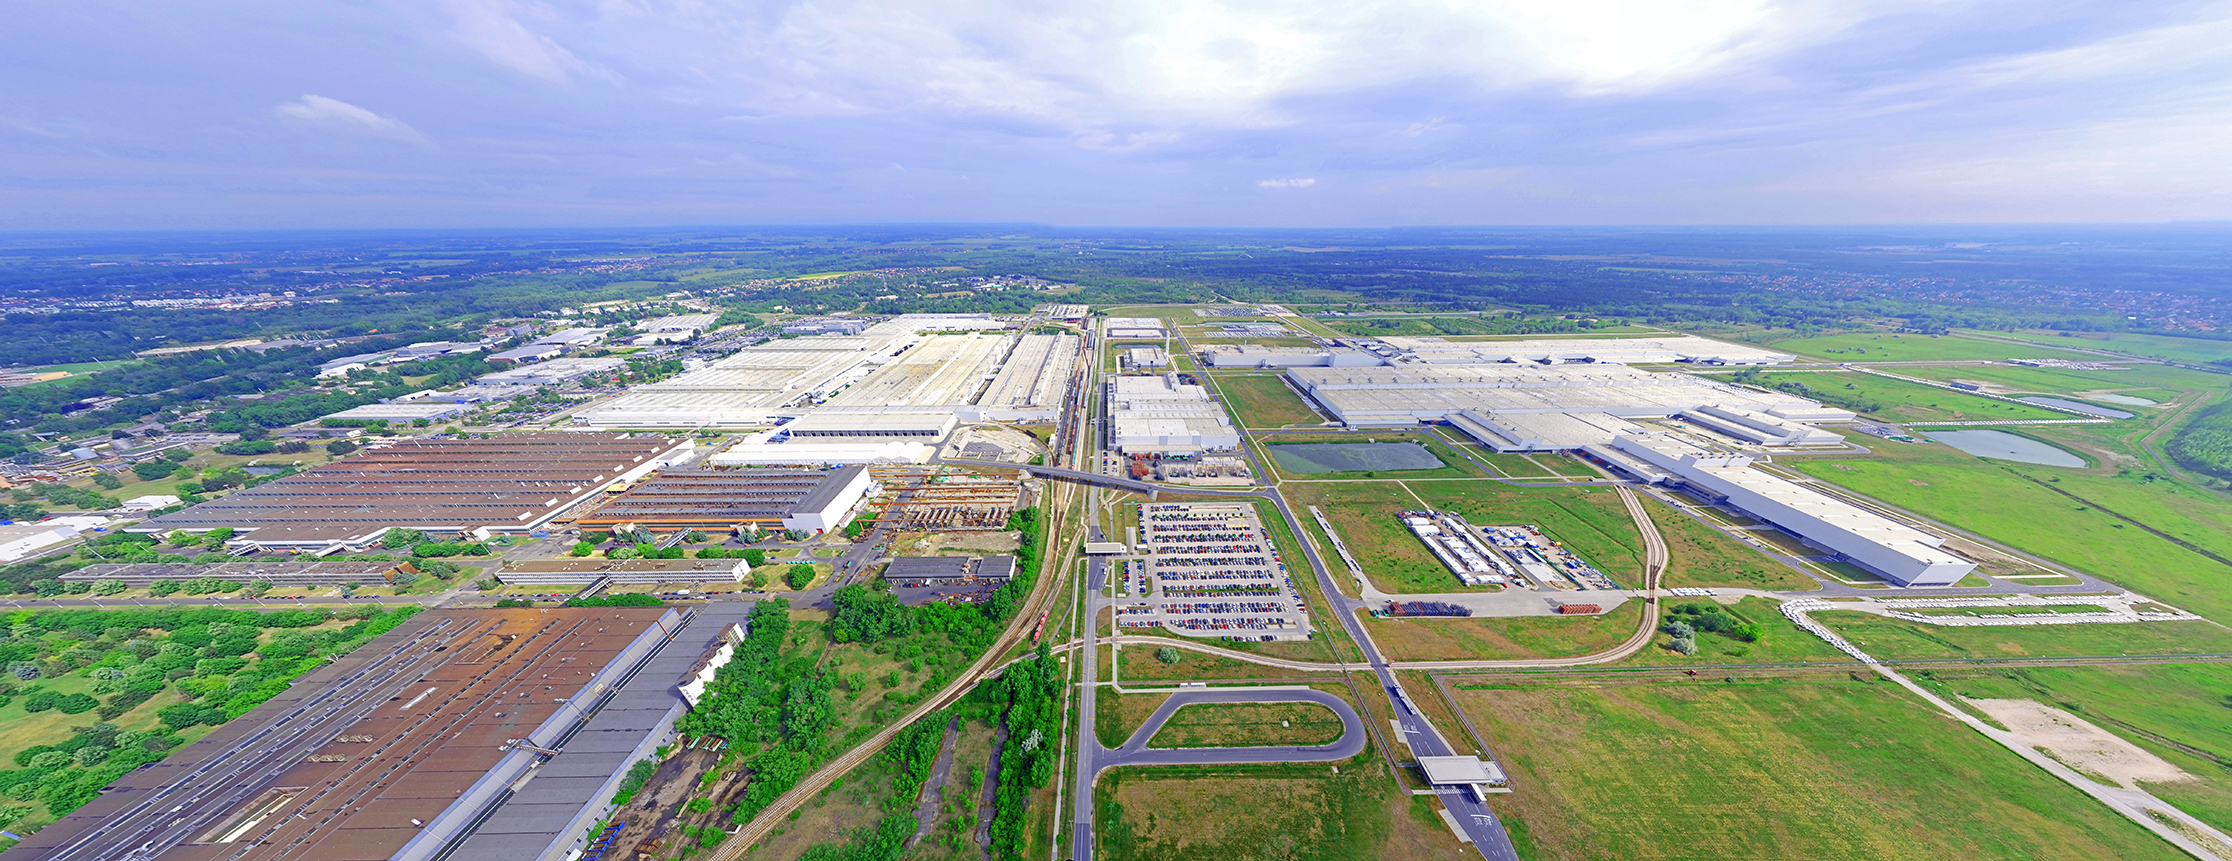 Audi Inaugurates Tool Plant Expansion in Hungary